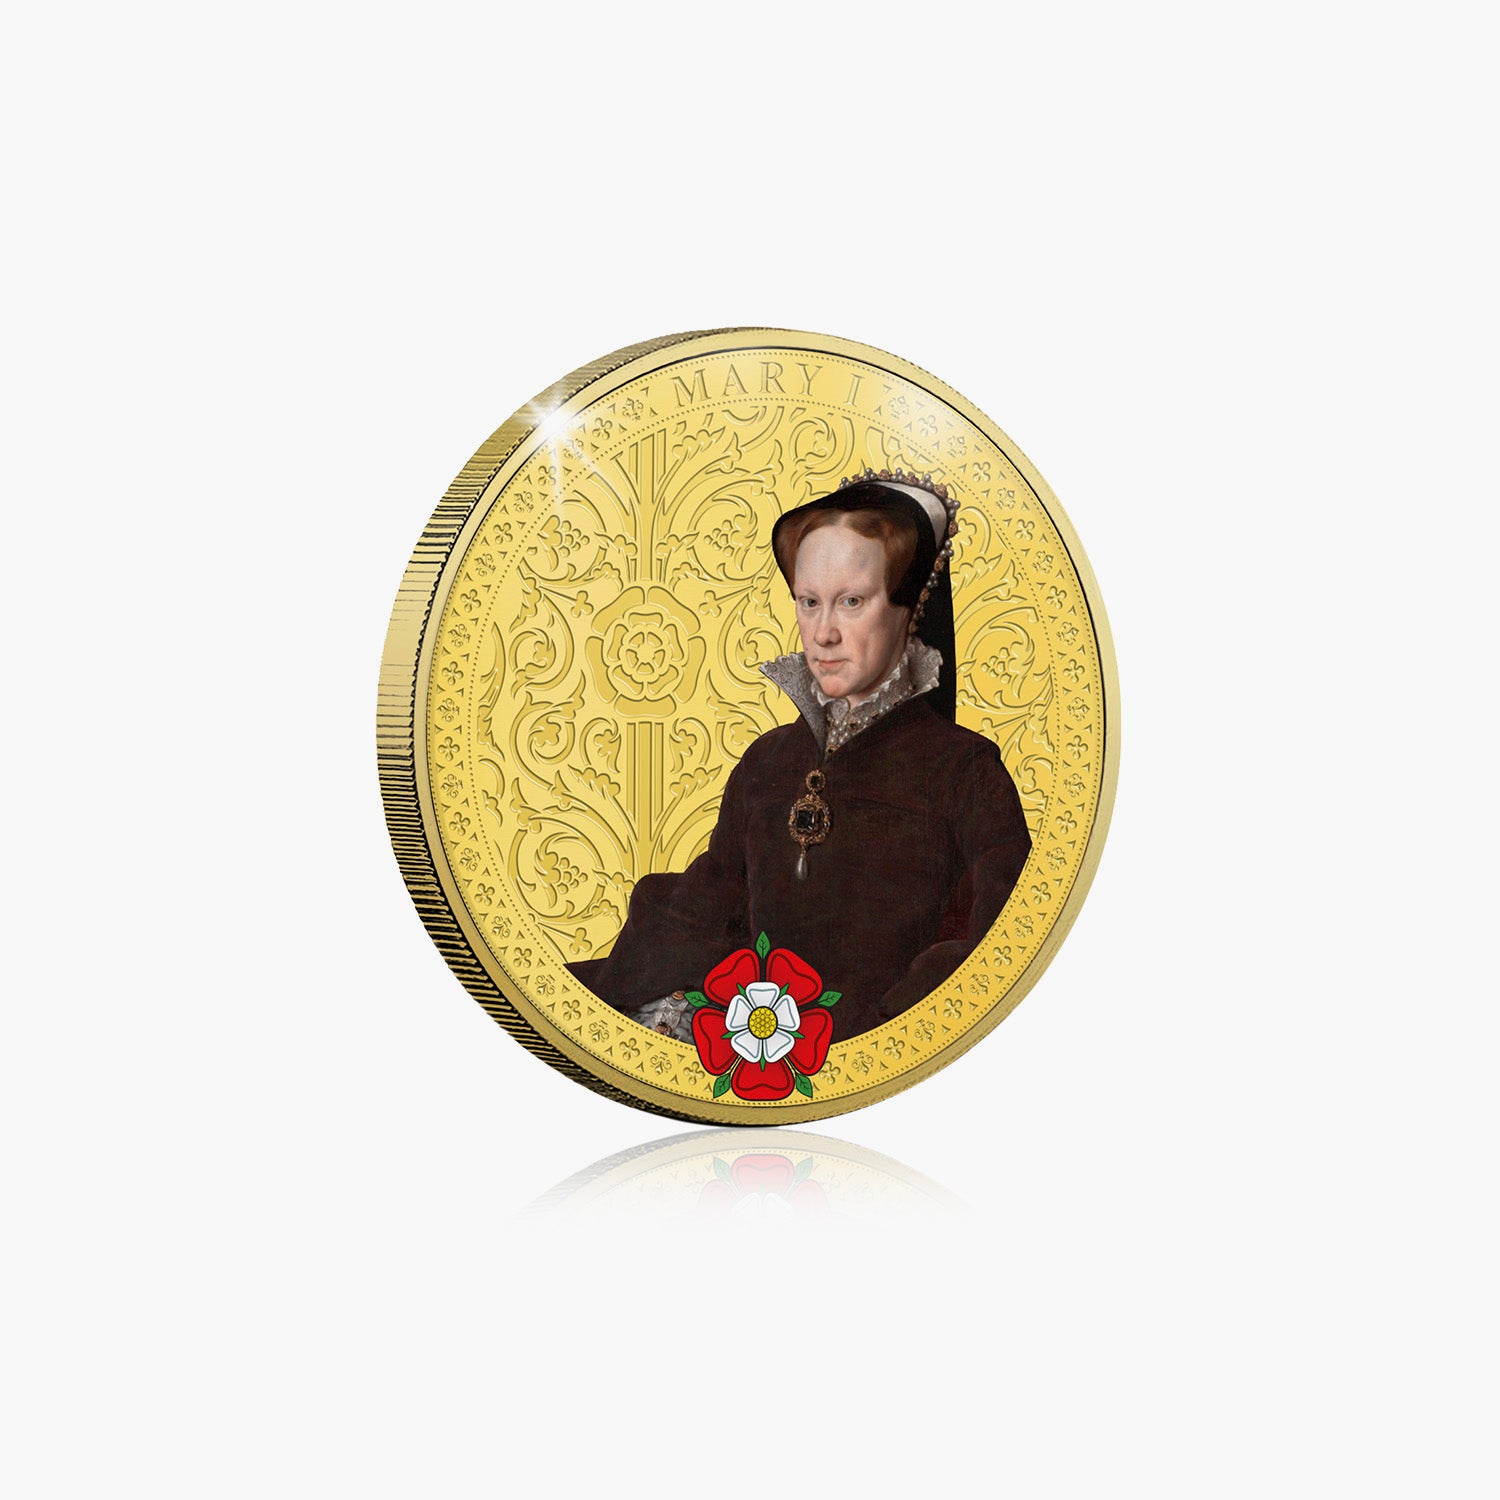 Mary I Gold-Plated Commemorative